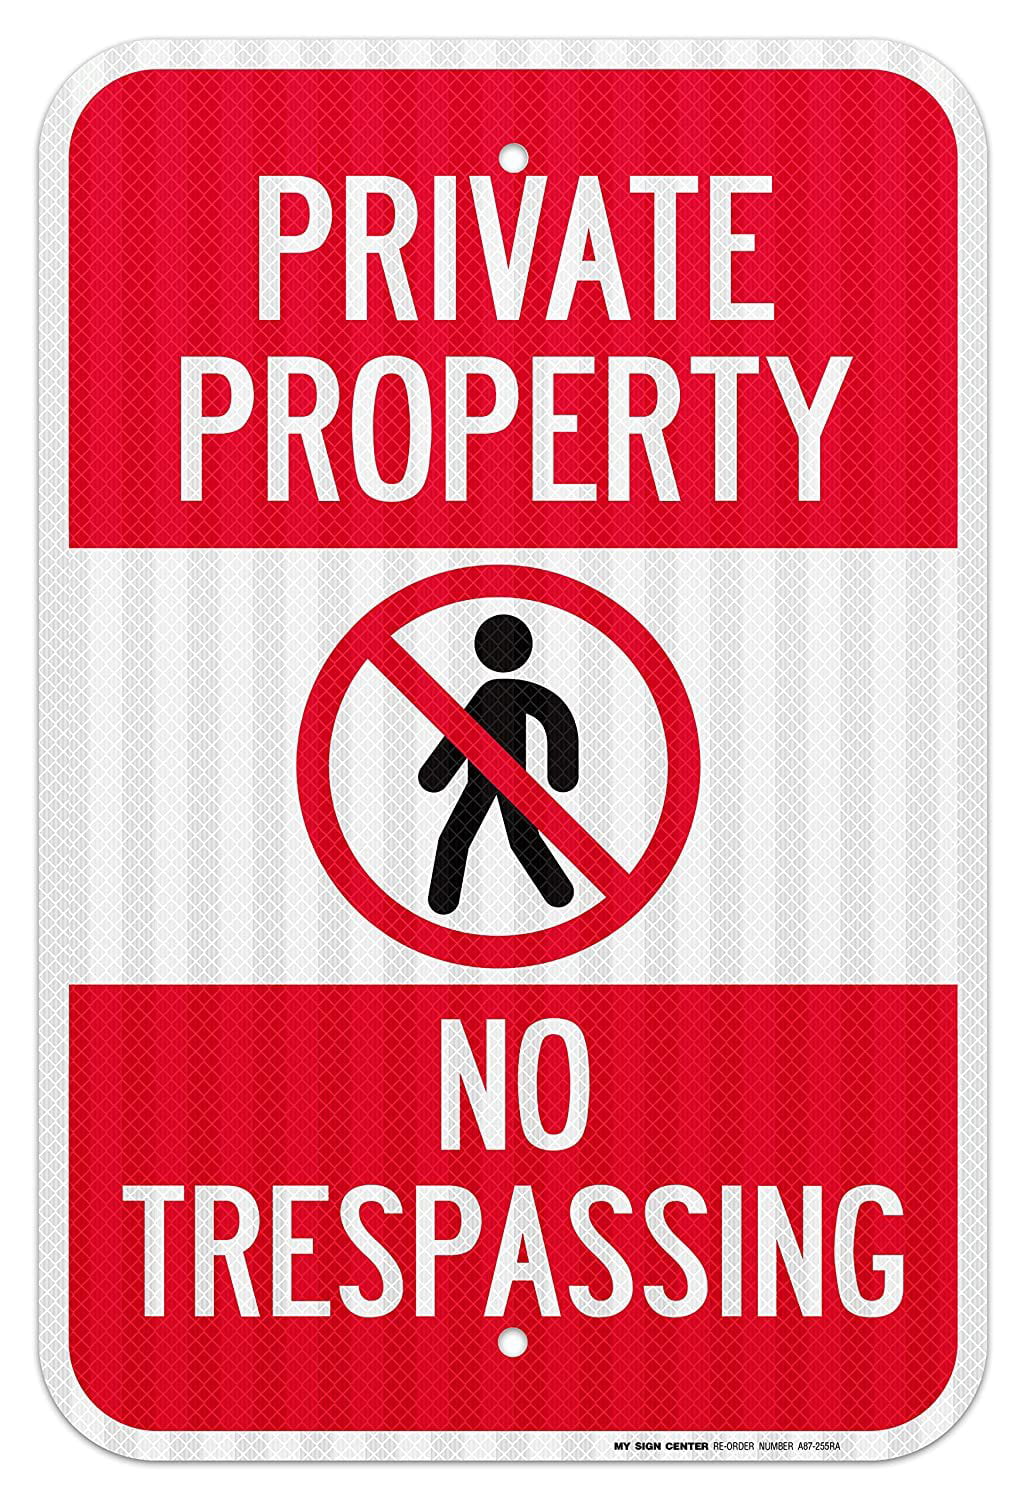 No Trespassing Warning 8"x12" Aluminum Sign Private Property